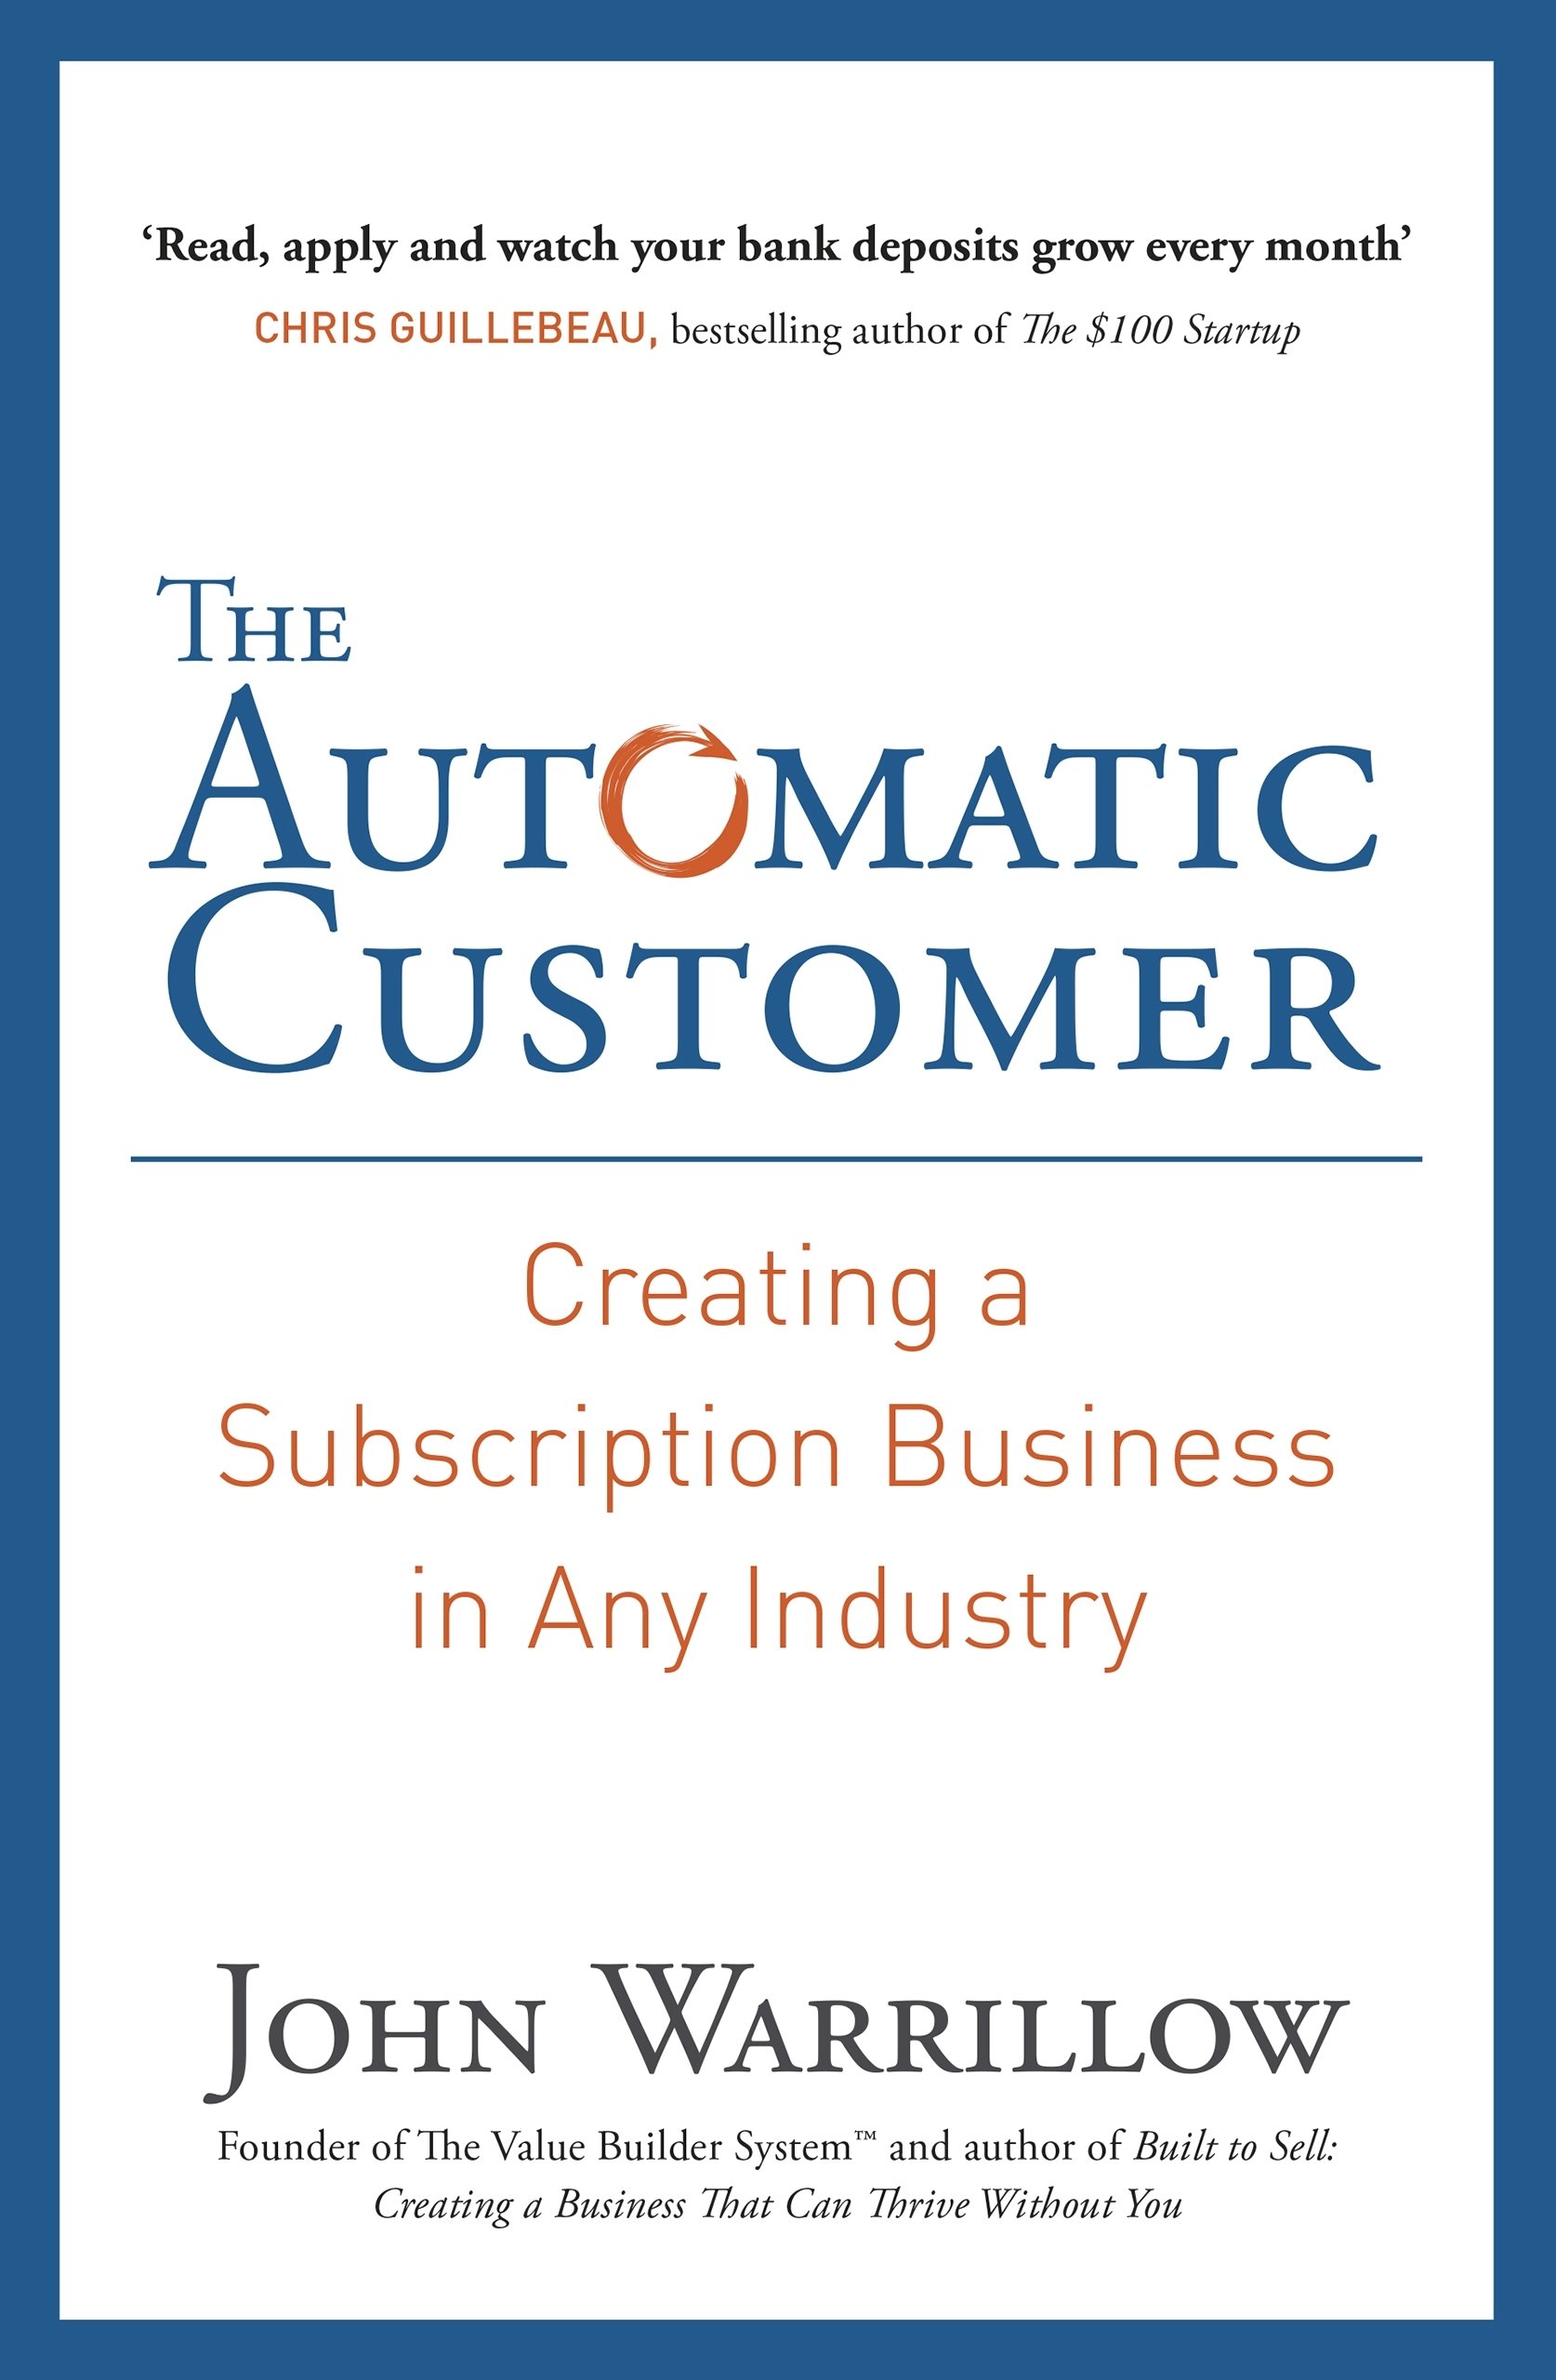 The Automatic Customer